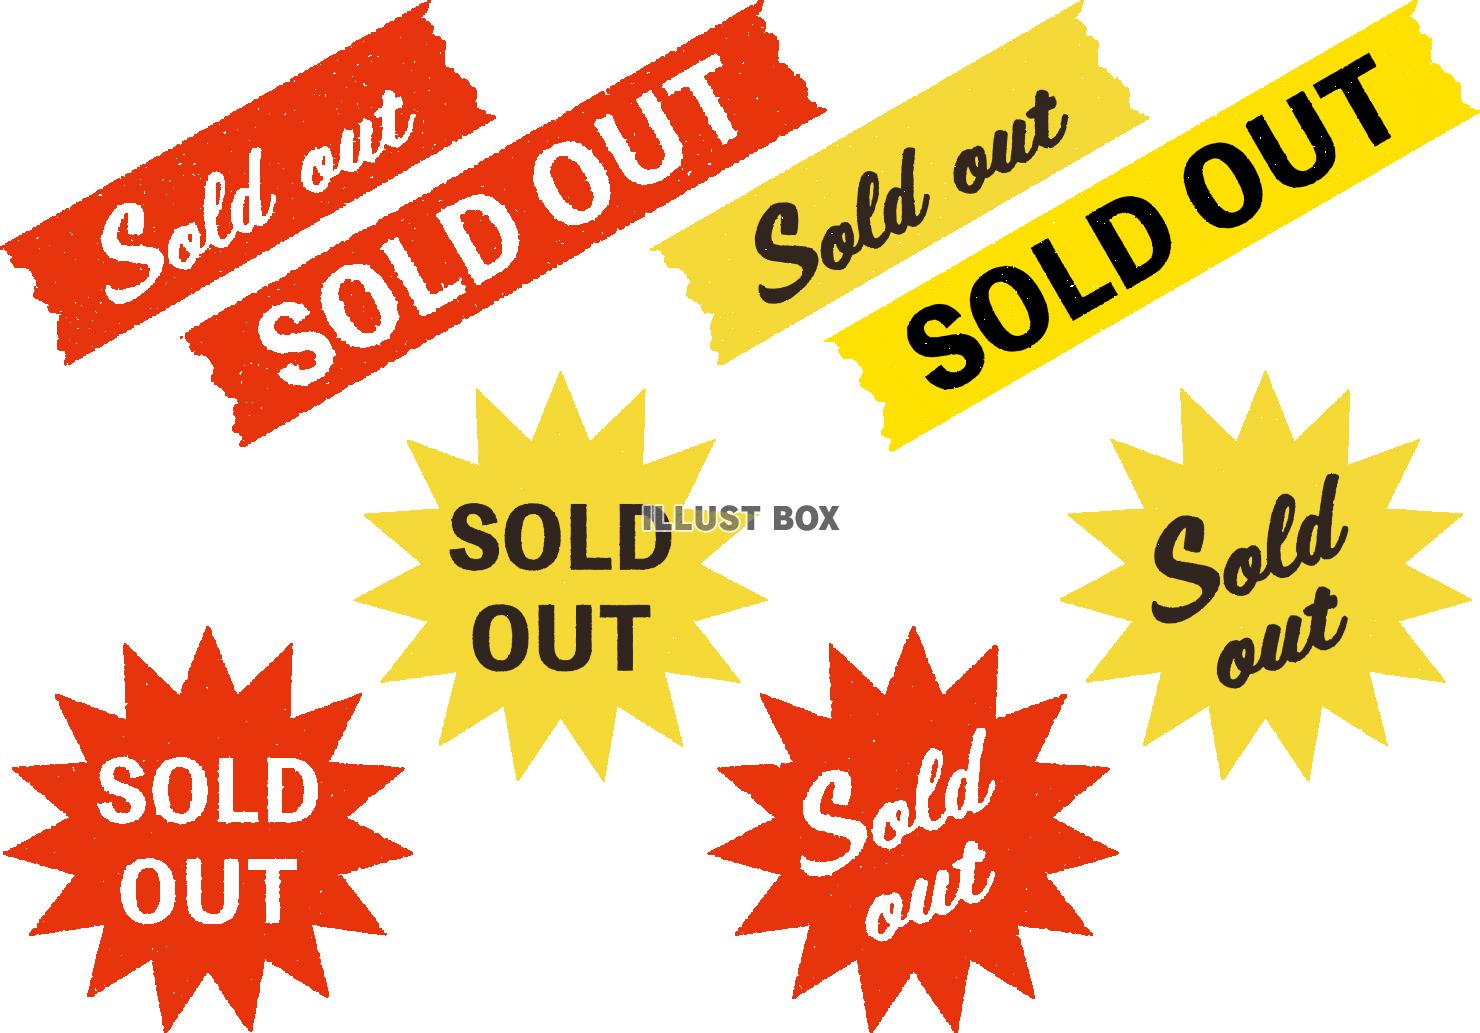 sold out★